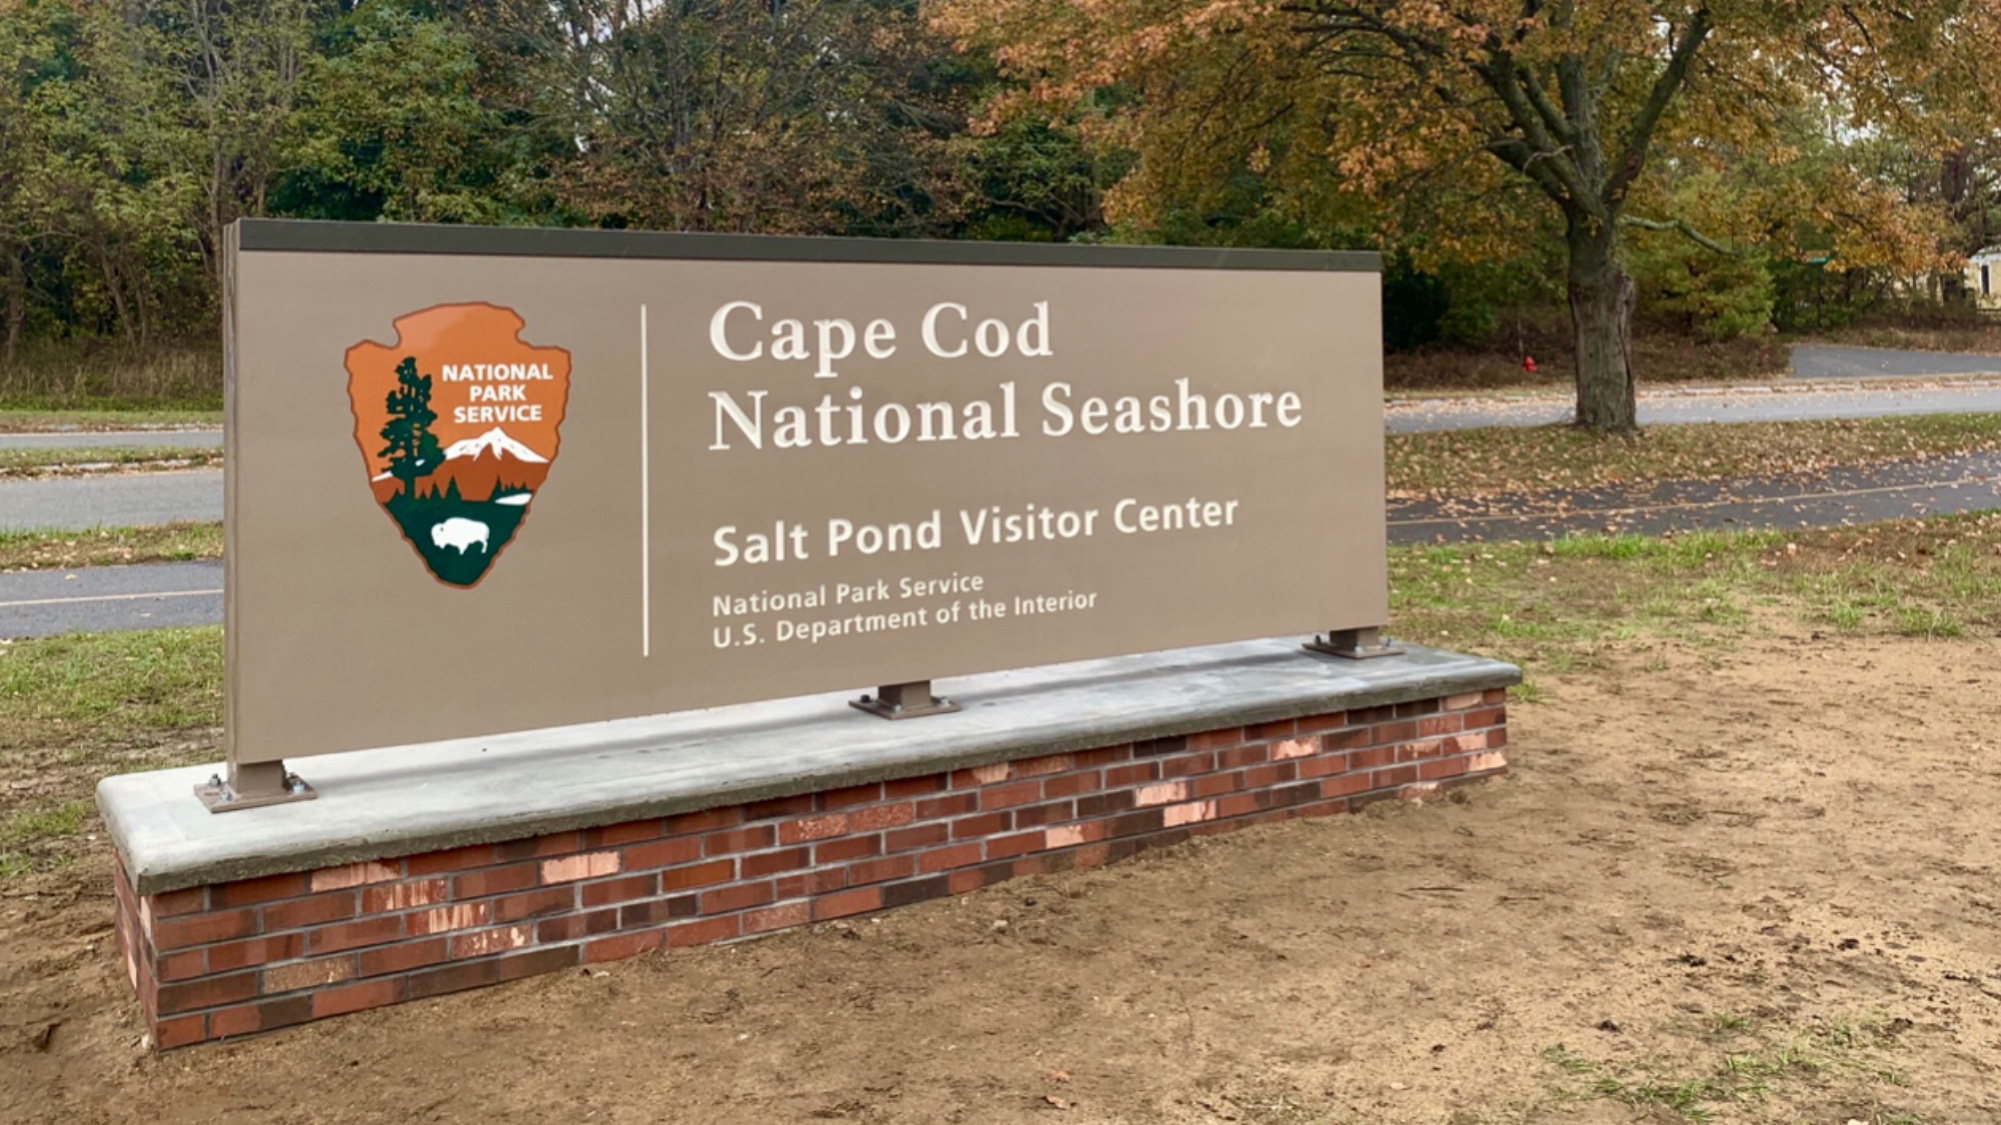 A new, brown park entrance sign sits on top of several rows of bricks. The sign reads: Cape Cod National Seashore, Salt Pond Visitor Center. There is a National Park Service arrowhead on the sign.